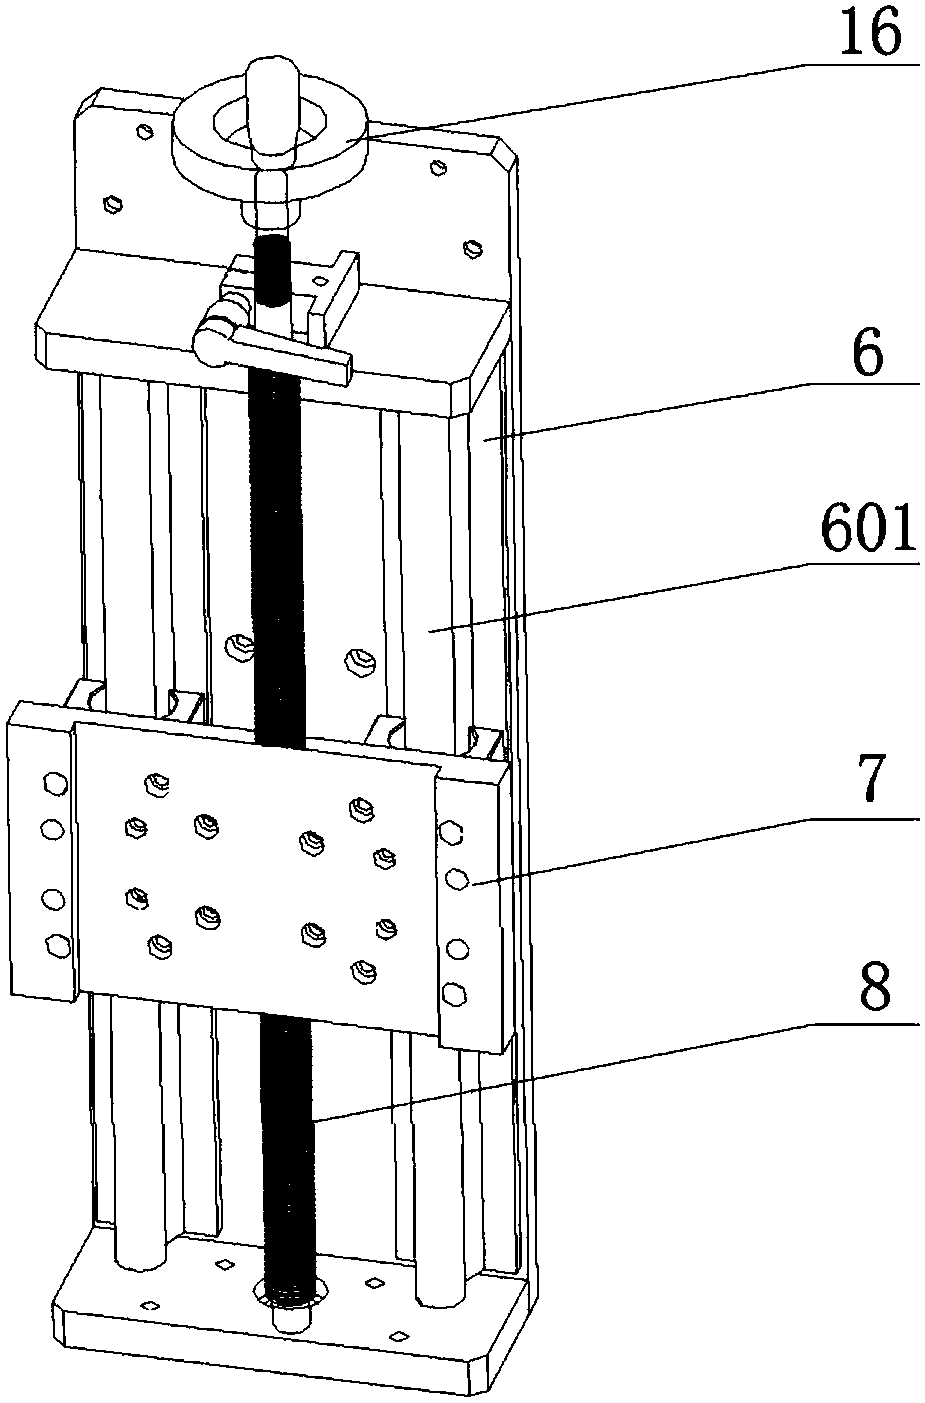 Test bracket for wireless charging device